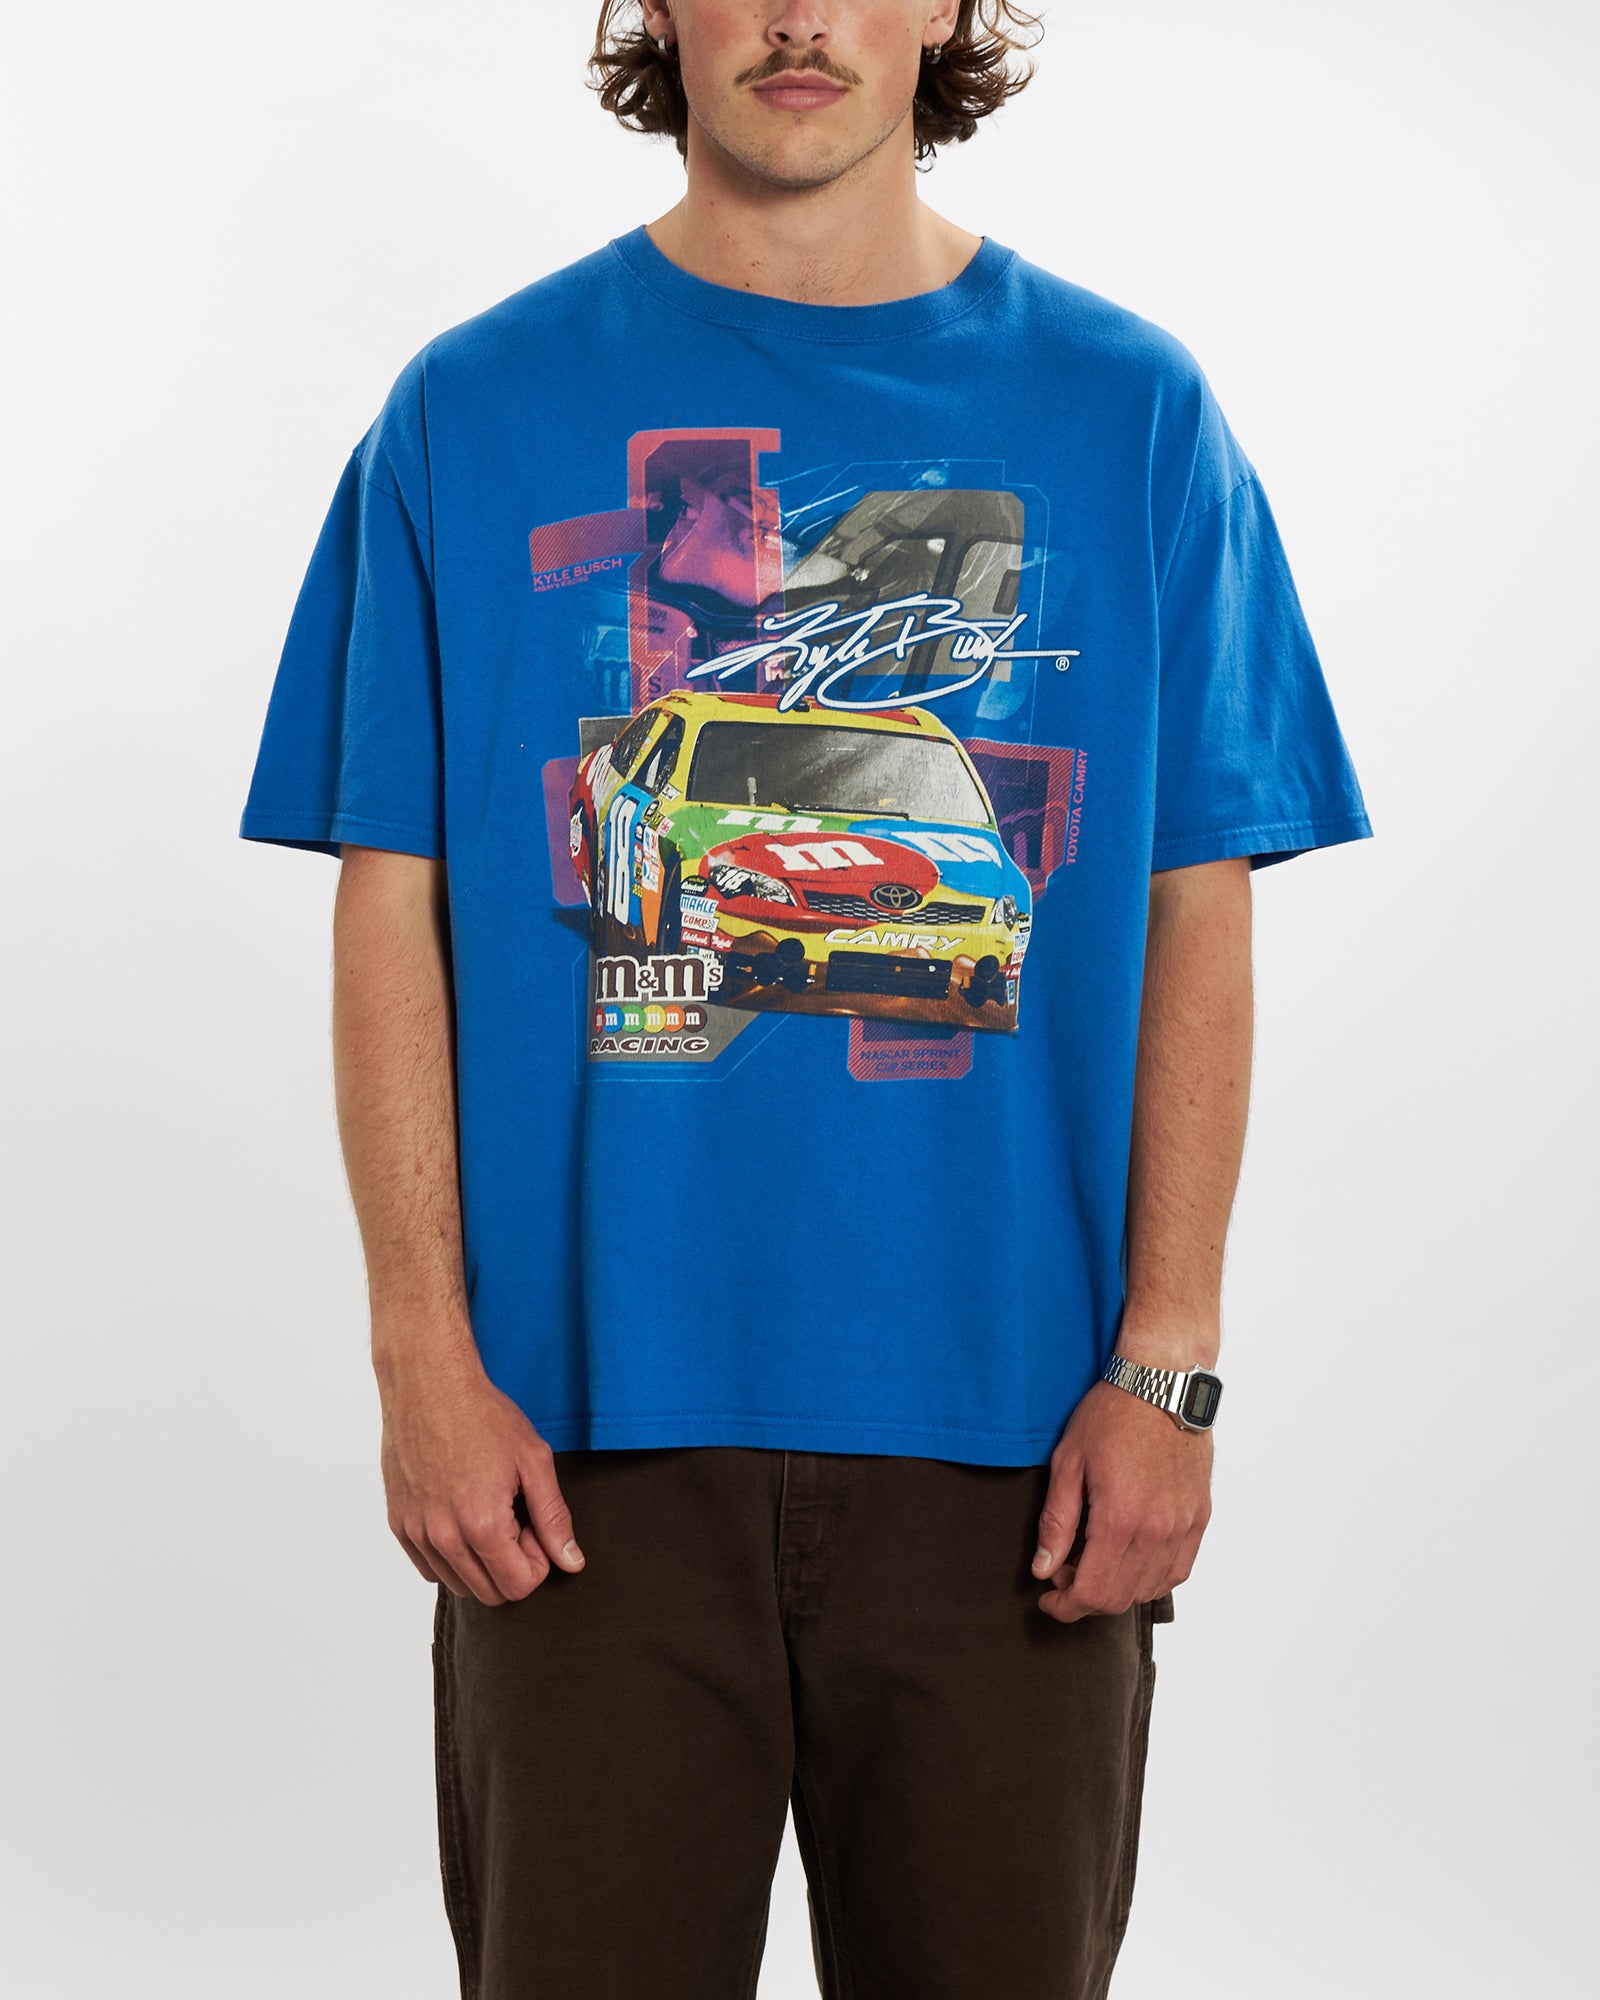 Vintage NASCAR Racing Tee L – The Real Deal